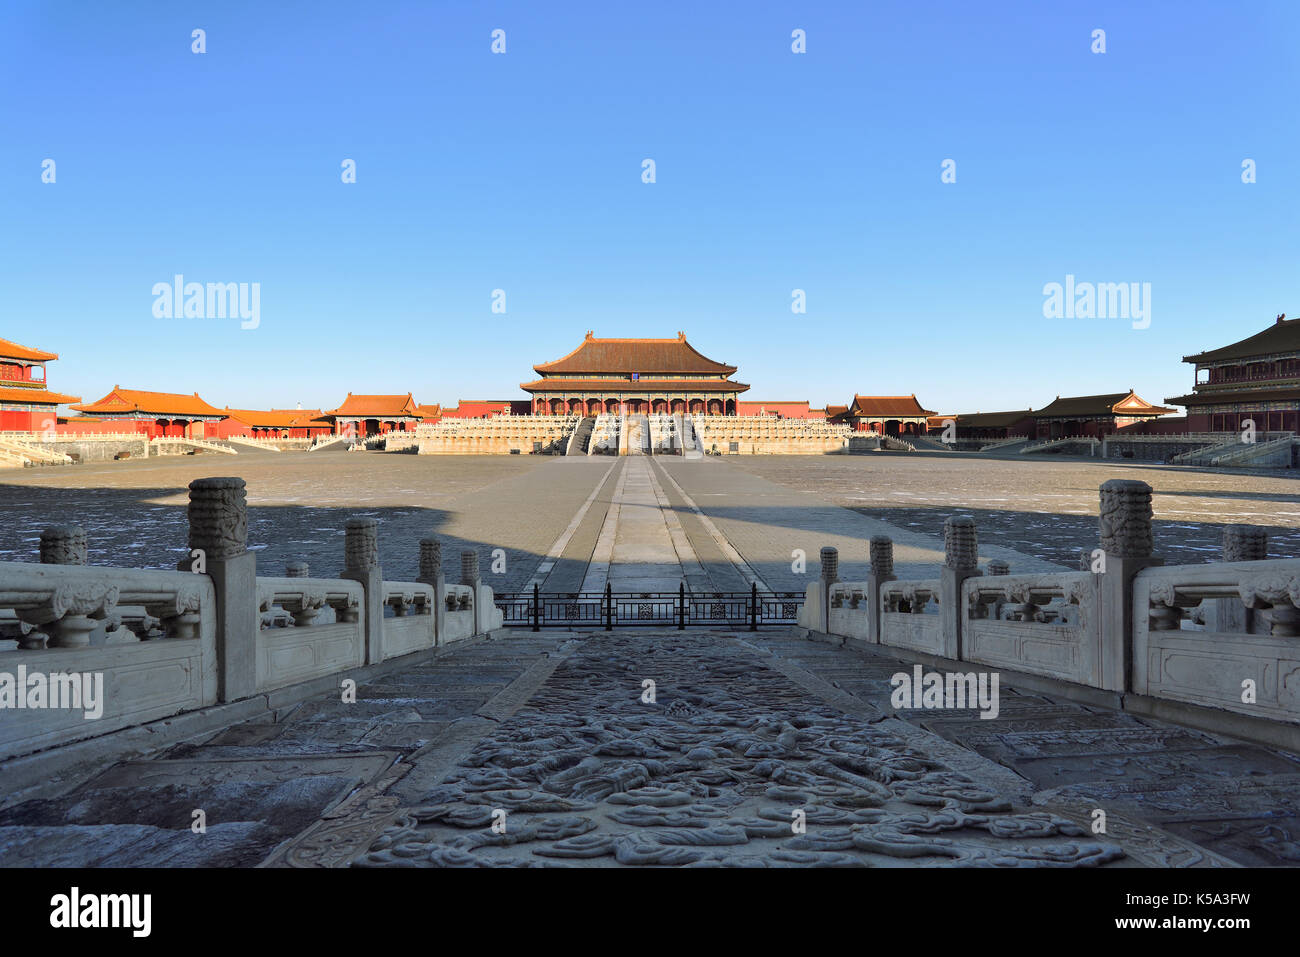 Supreme Harmony Hall and square in Forbidden City. Stock Photo